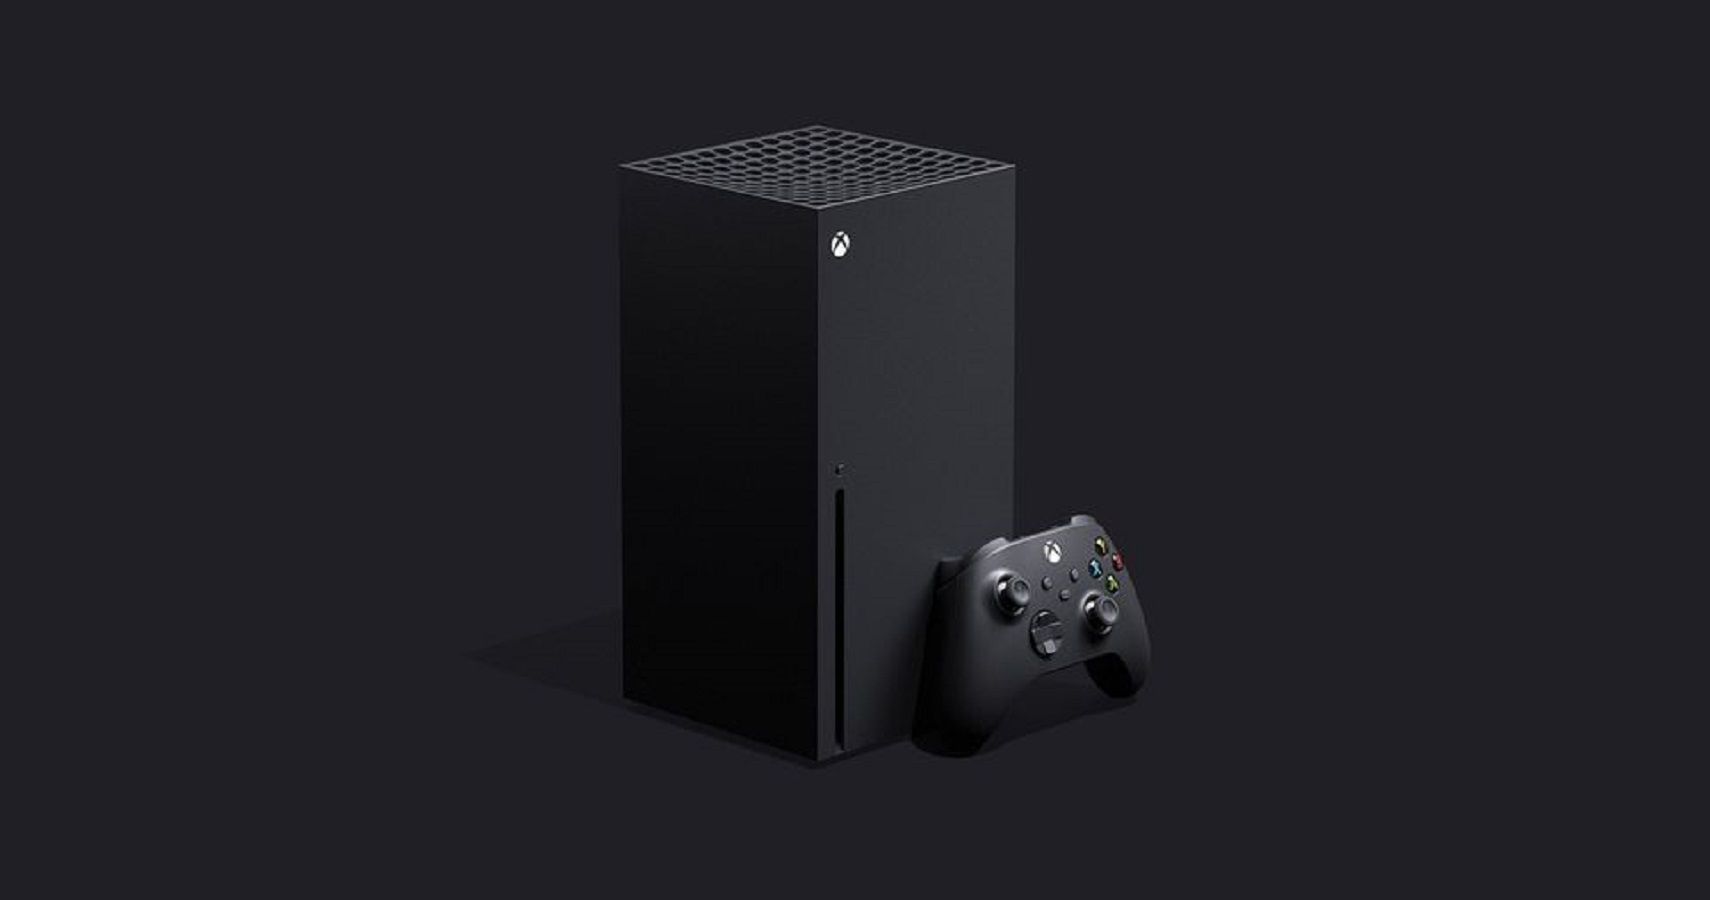 A Promotional image of the Xbox Series X/S